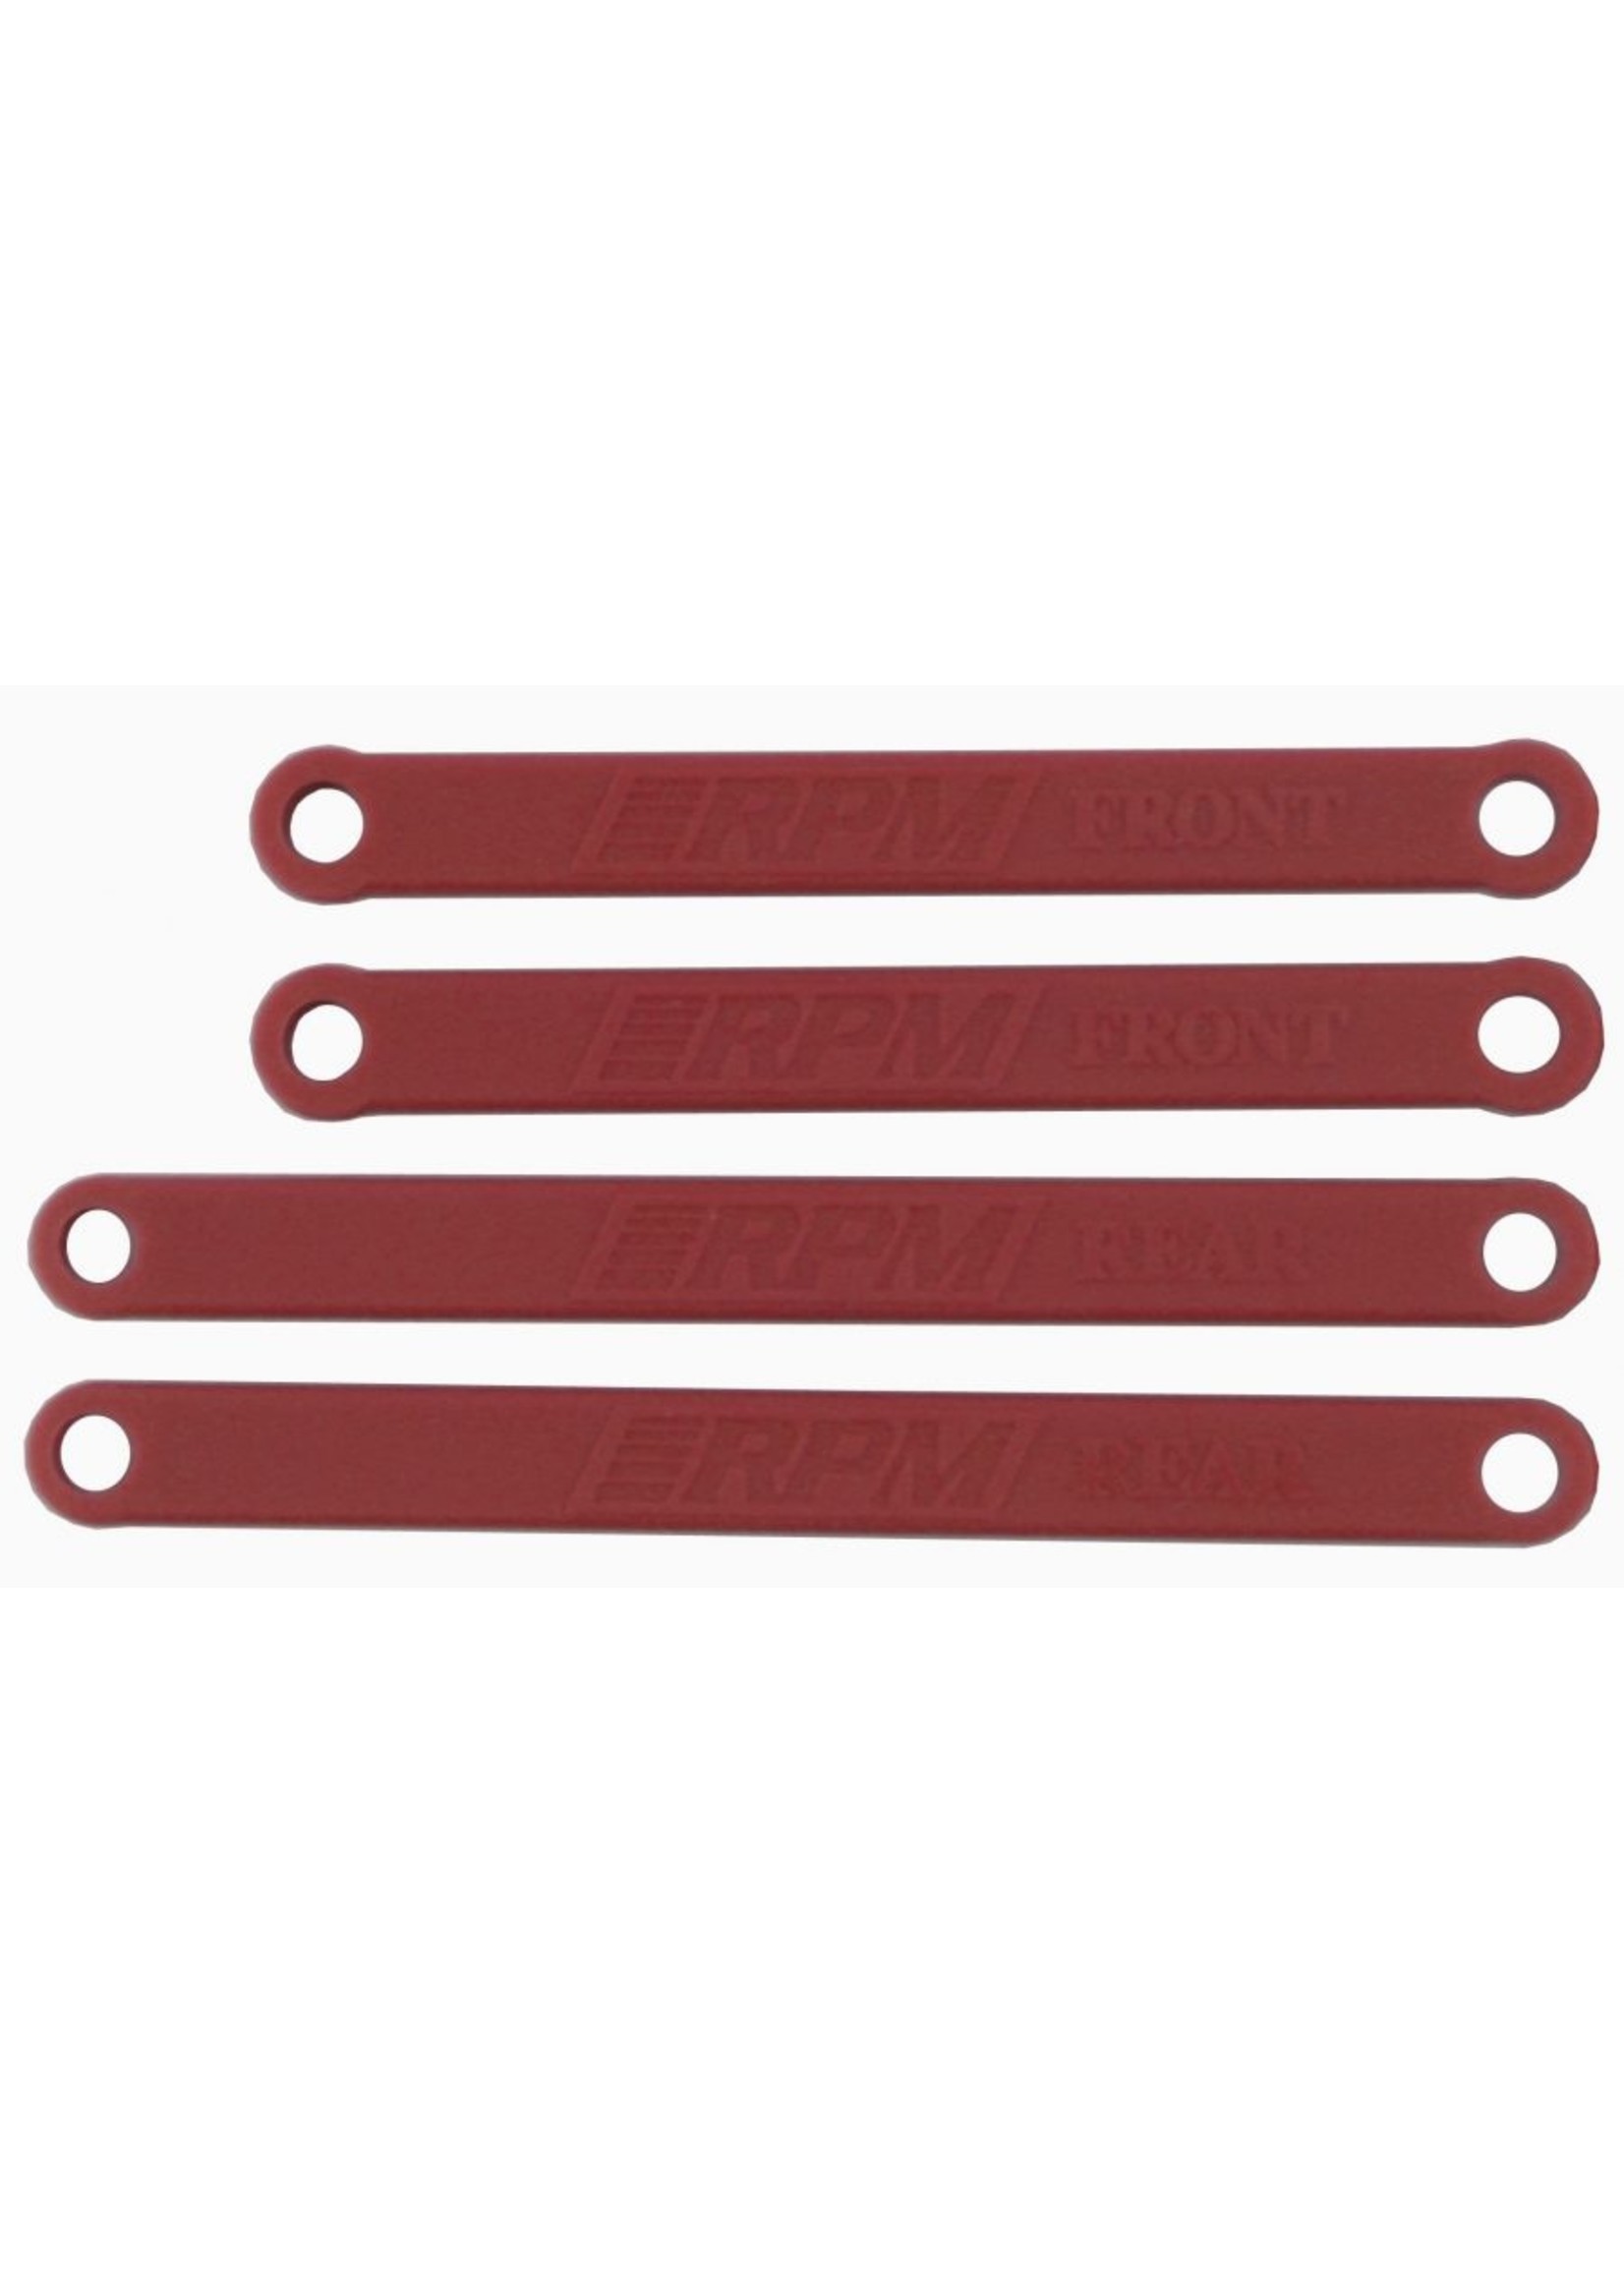 RPM 81269 - Heavy Duty Camber Links for Traxxas Rustler, Stampede 2WD - Red